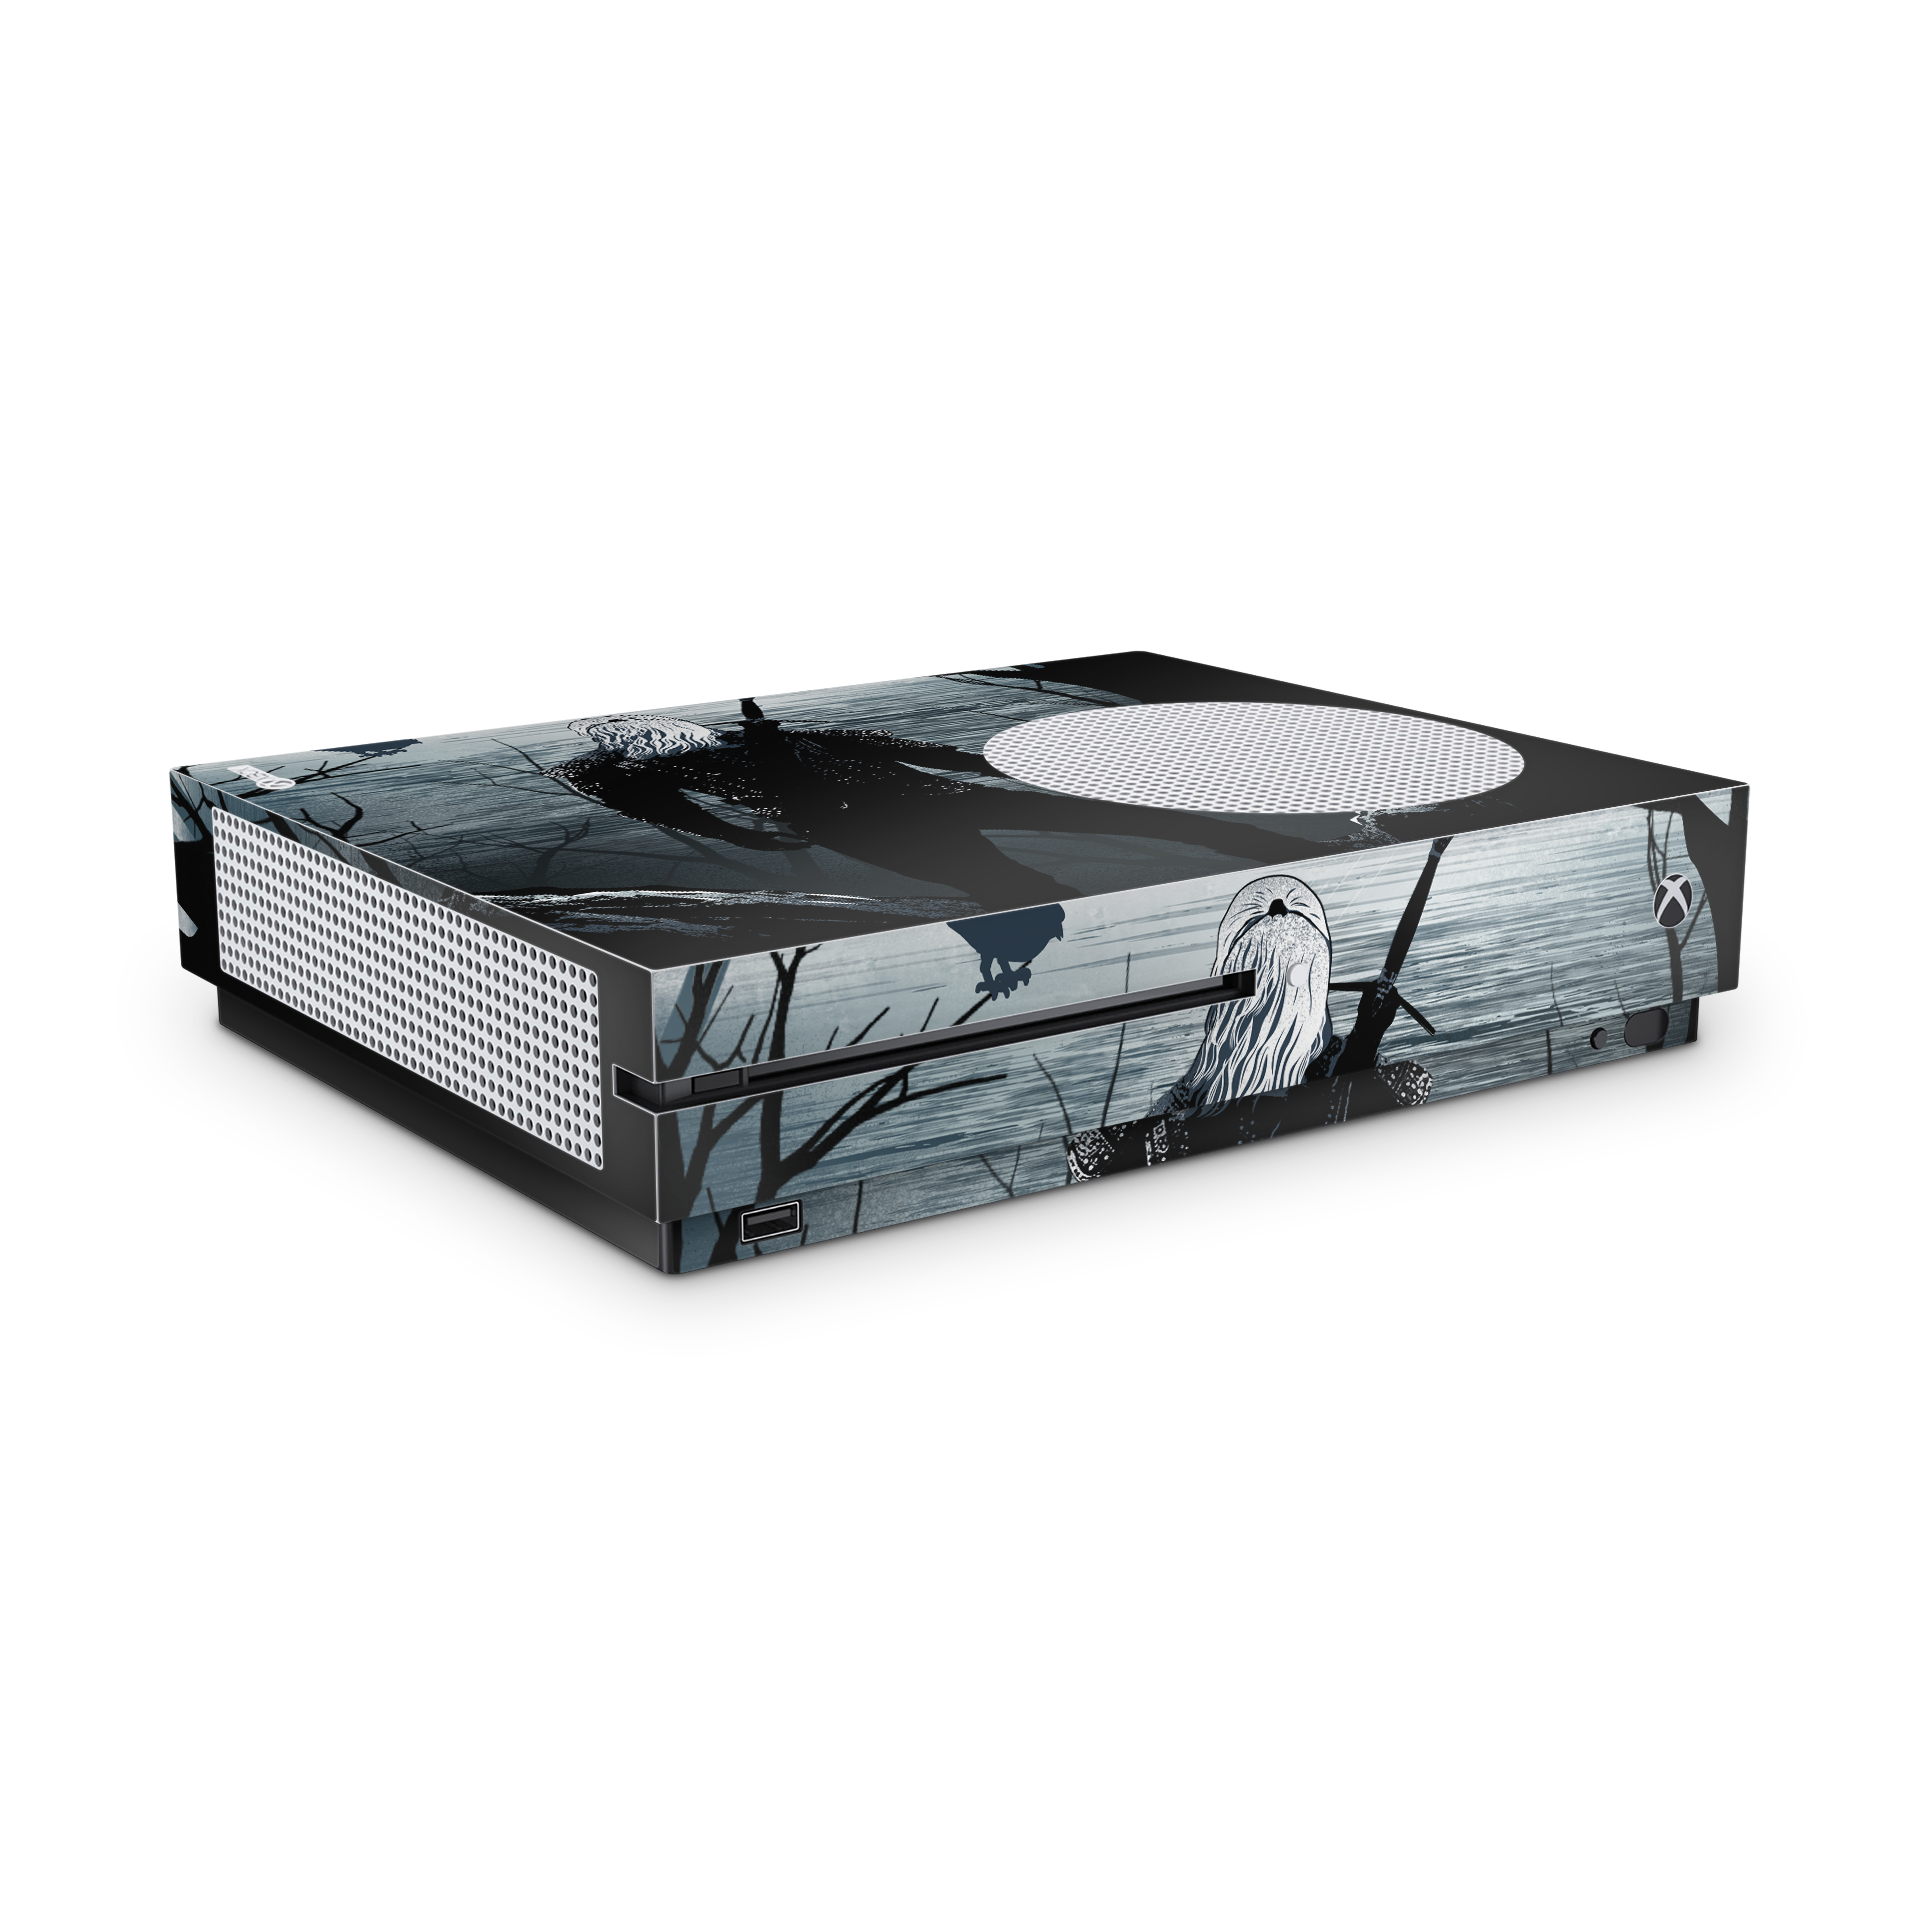 The Witcher - Xbox One S Console Skin